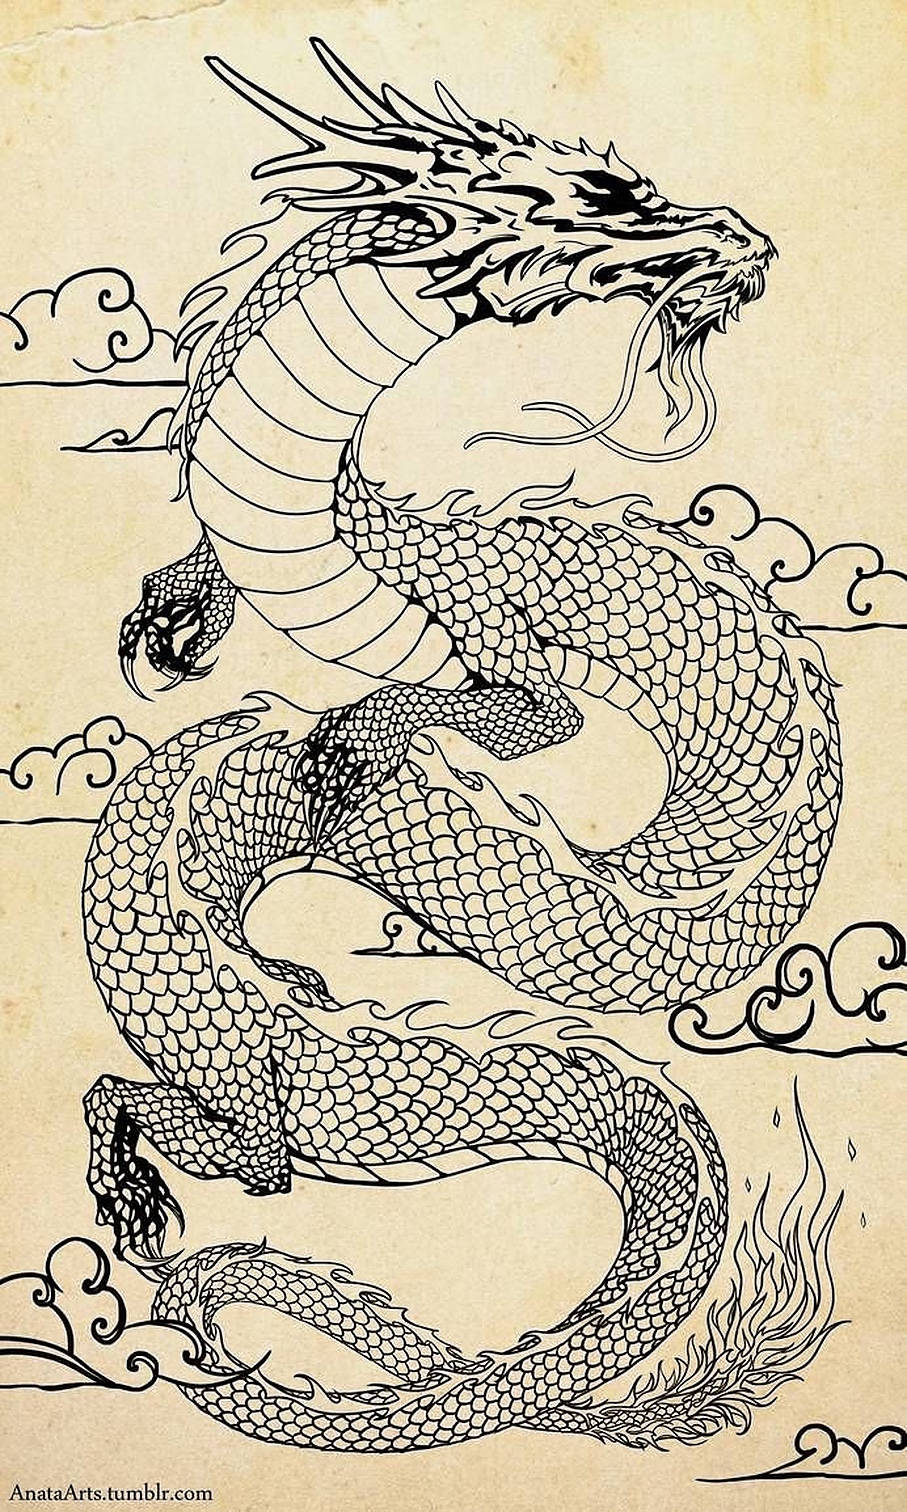 170 Japanese Dragon Tattoos That Symbolize Your Strength